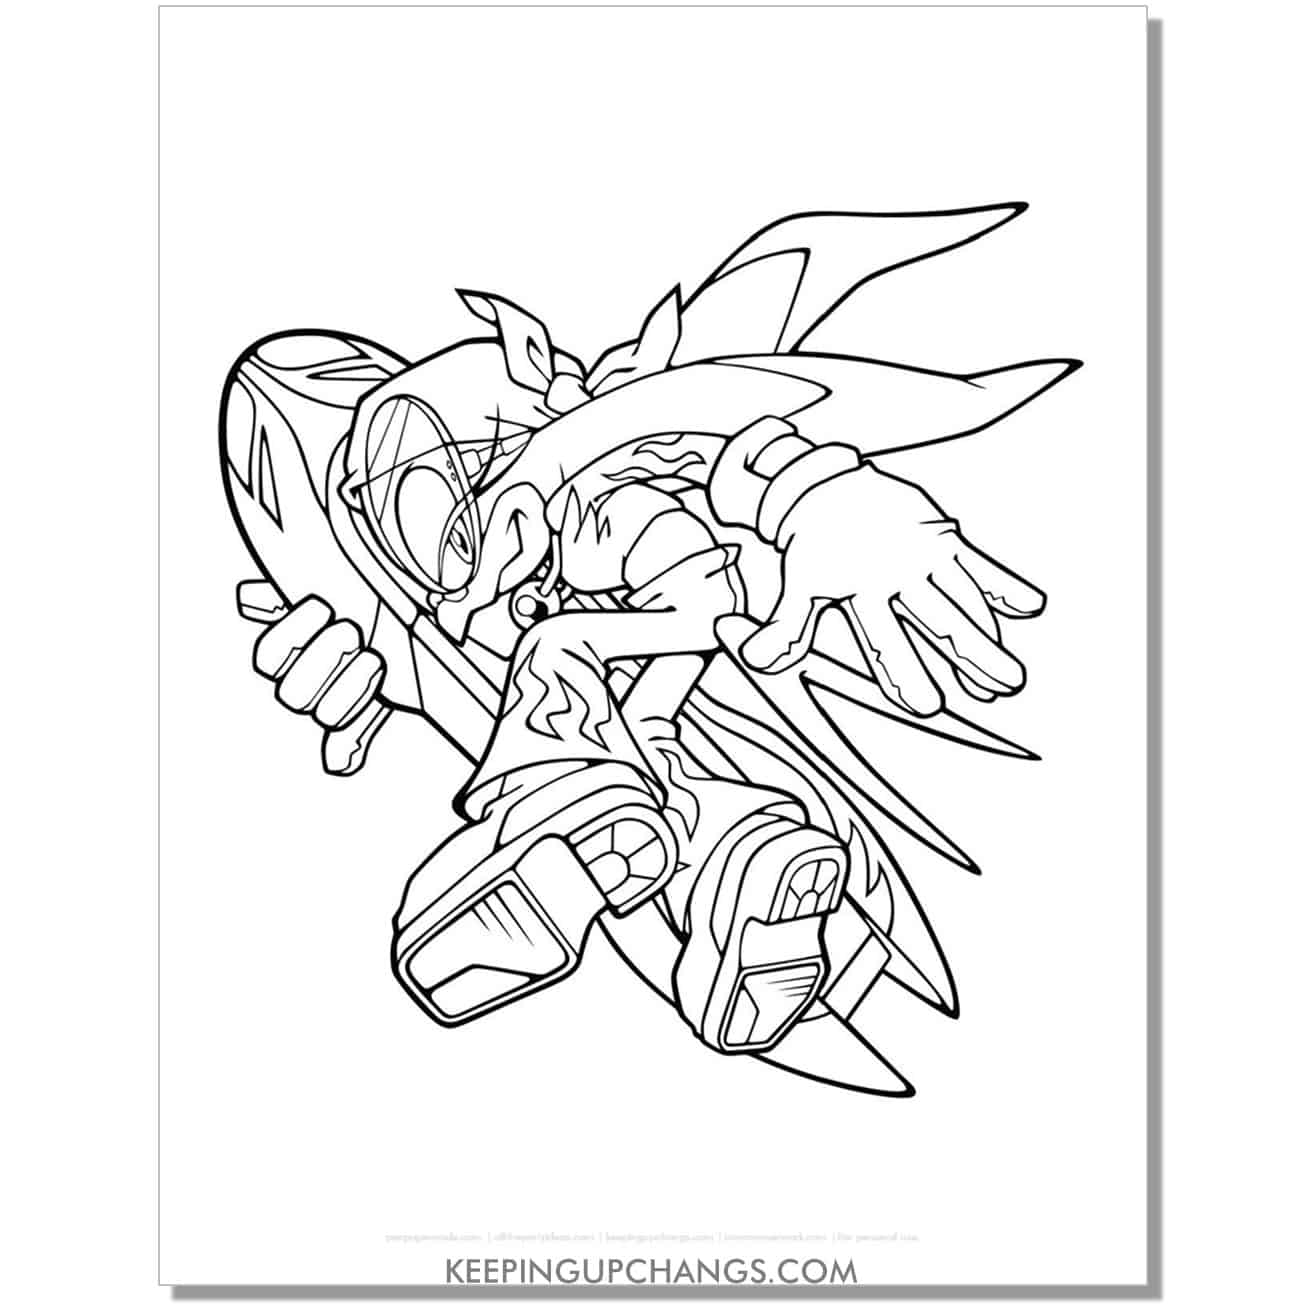 wave the swallow sonic coloring page.